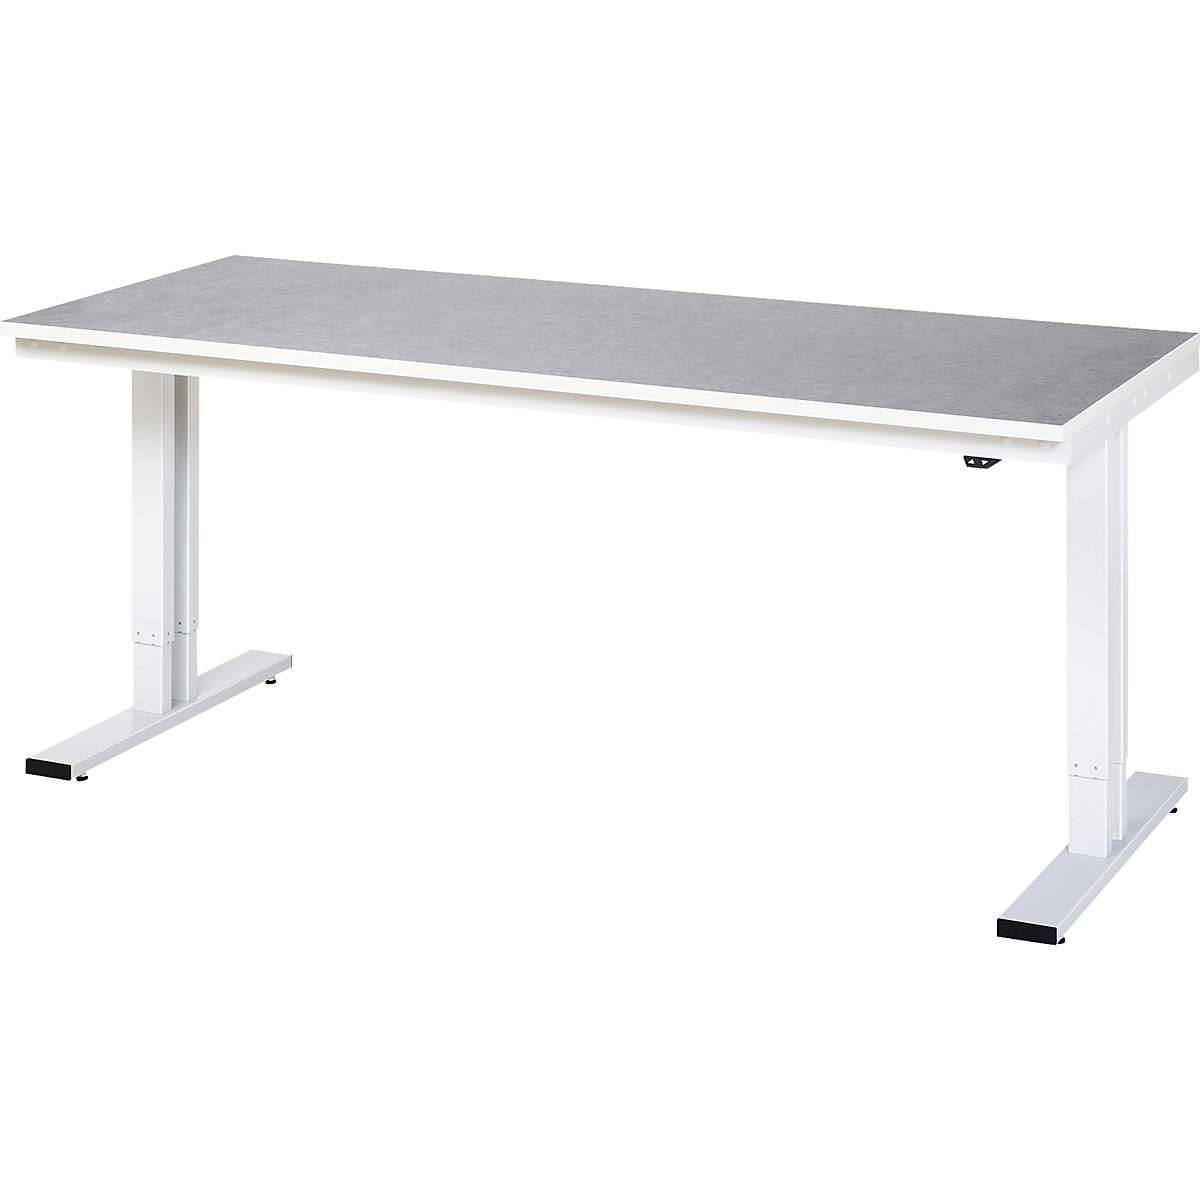 Work table, electric height adjustment – RAU, linoleum cover, max. load 300 kg, WxD 2000 x 800 mm-5